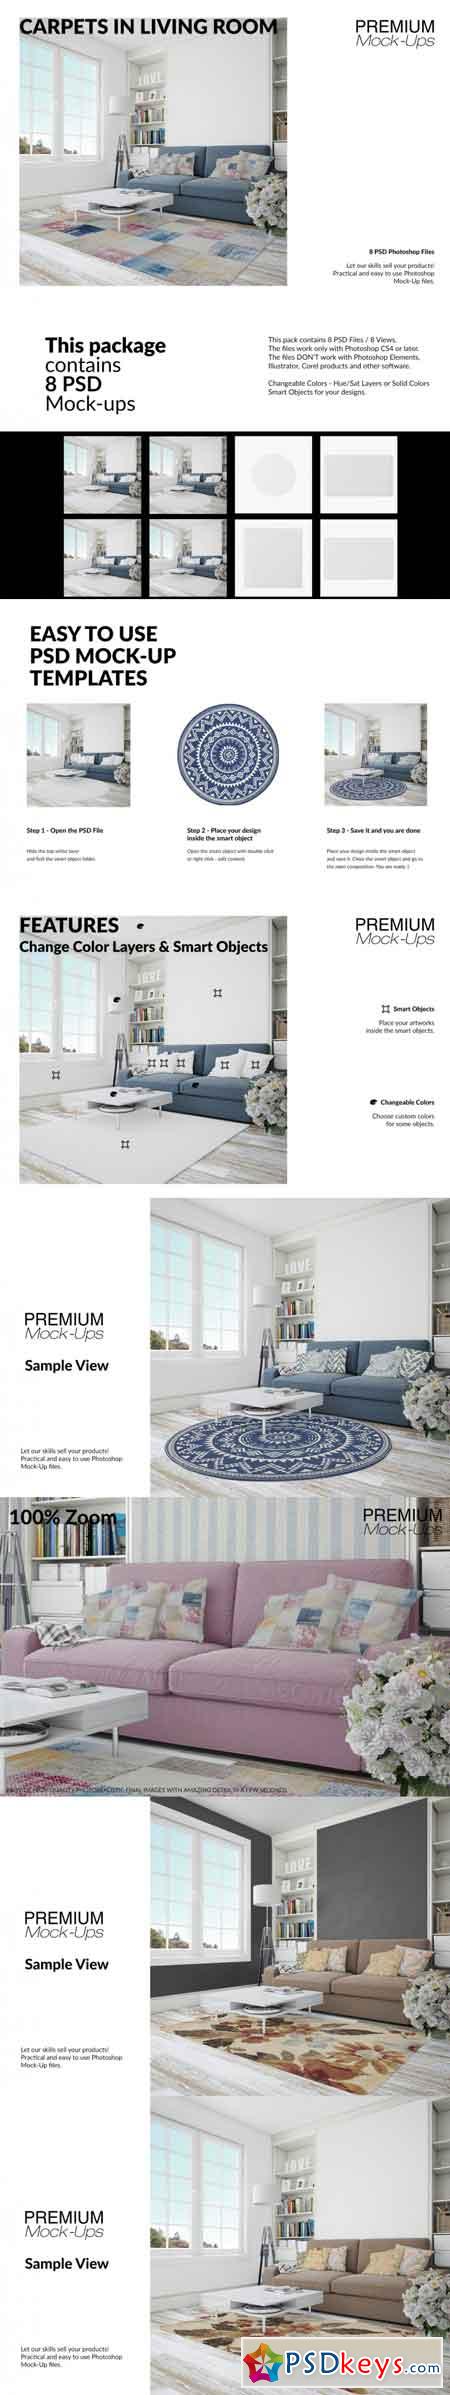 4 Types of Carpets & Pillows in Living Room Mockup Set 3499046